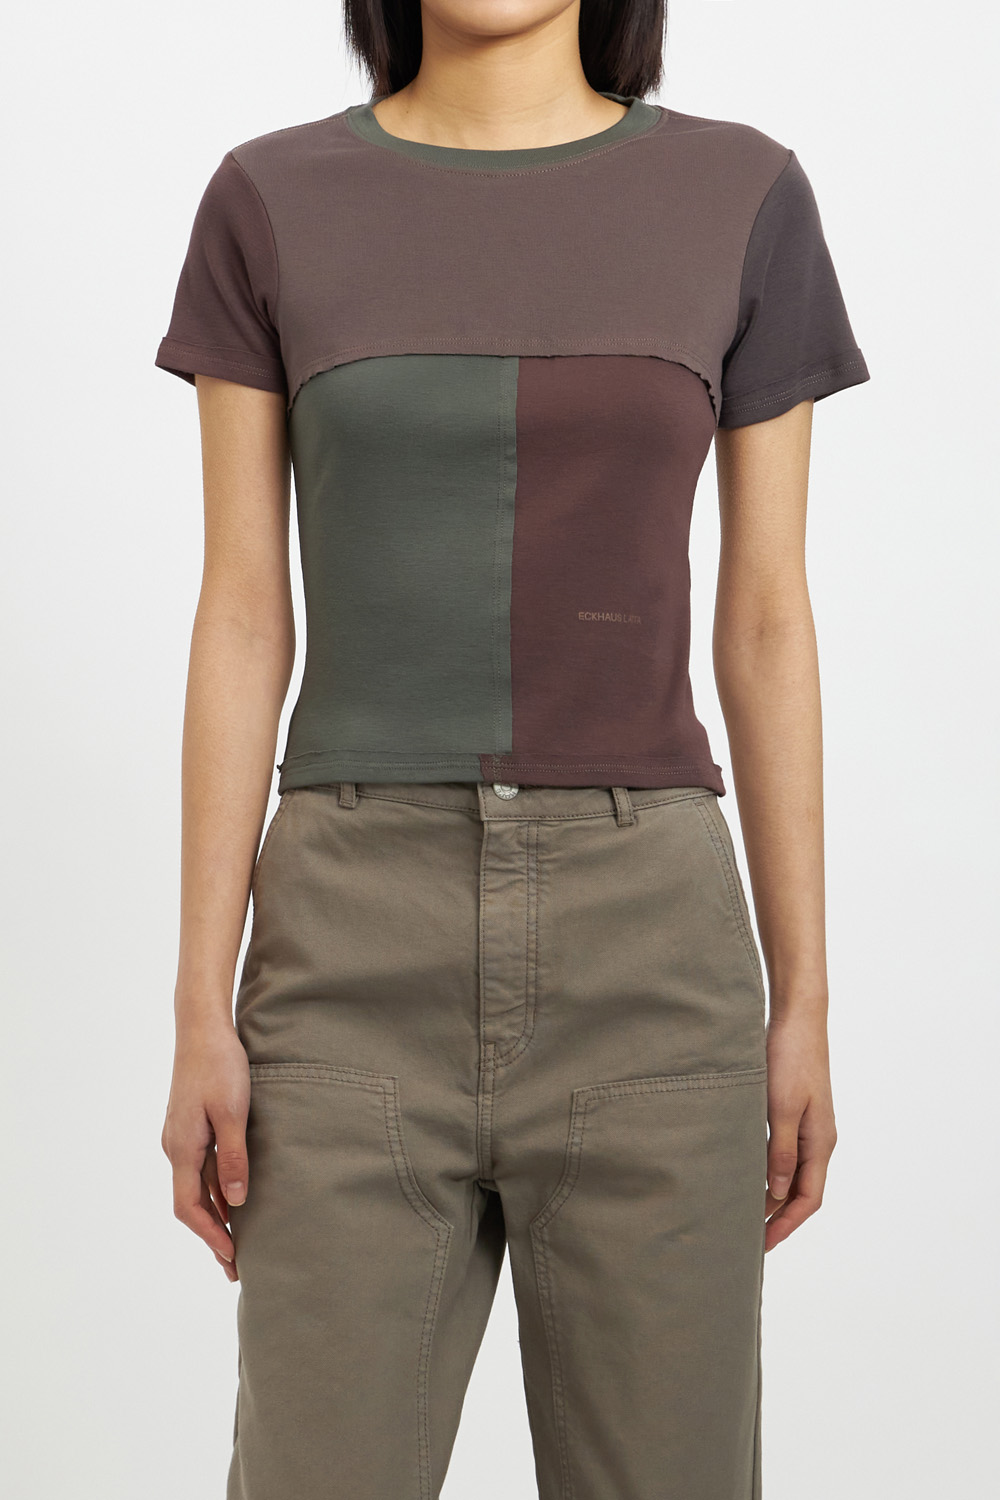 Lapped Baby Tee_Brown